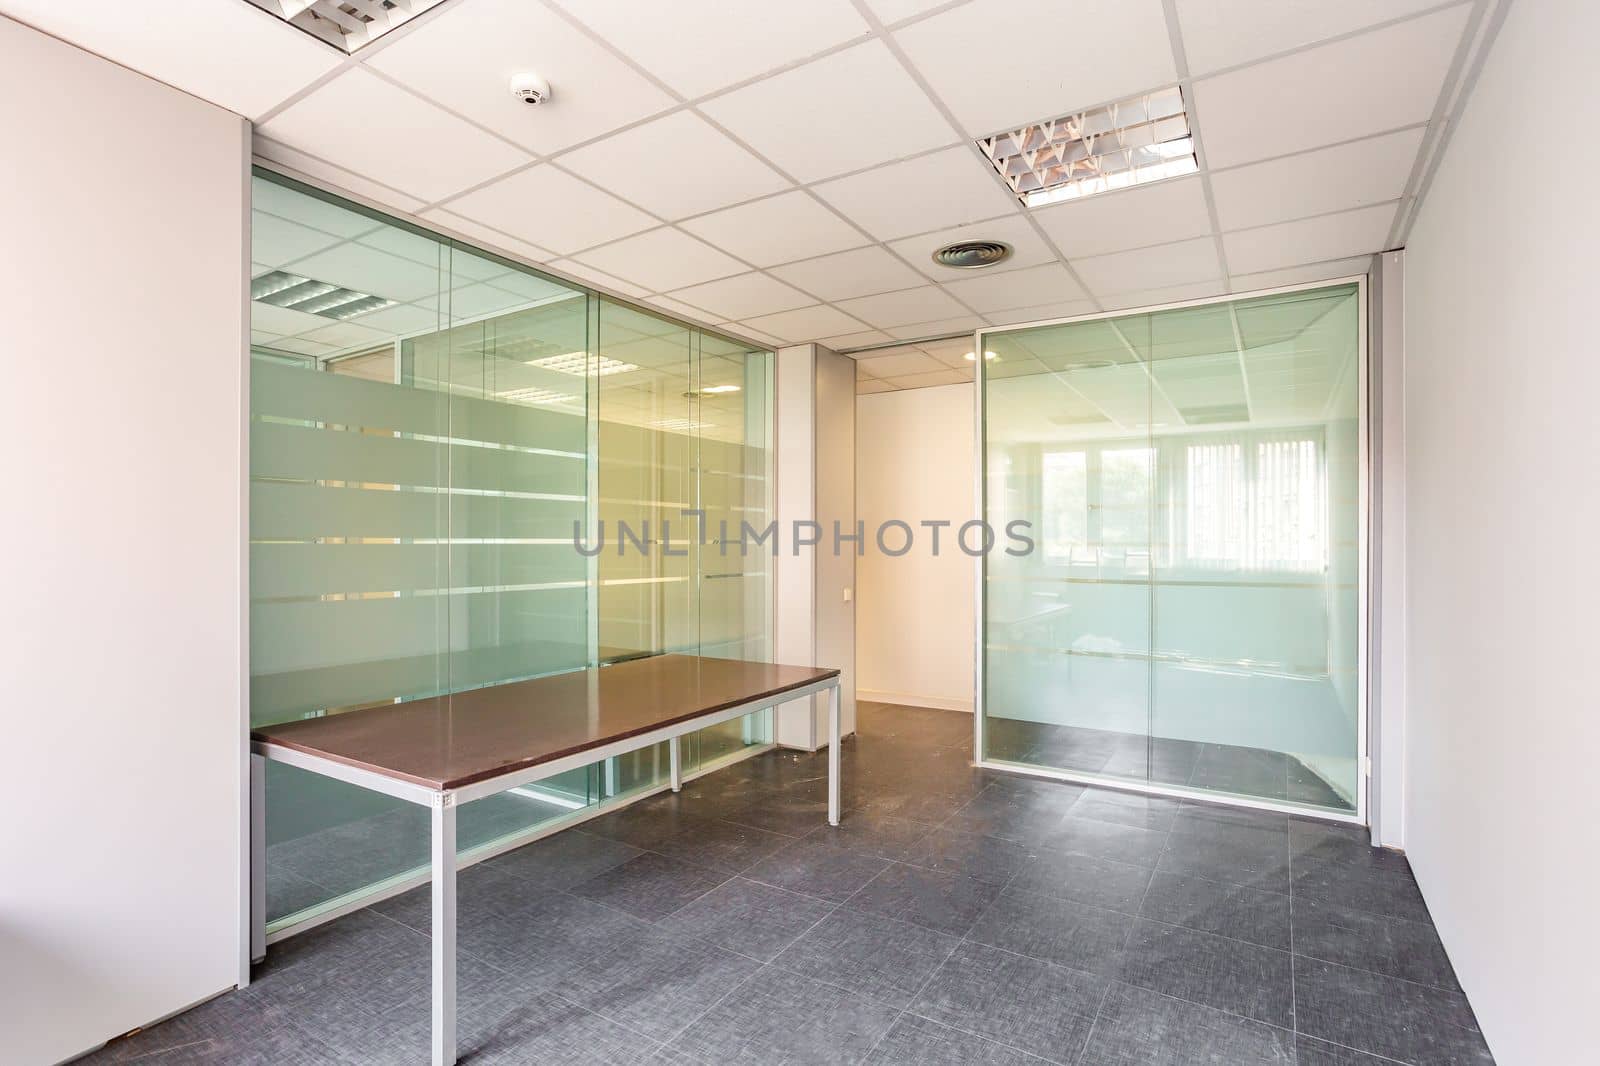 In a bankrupt office building, one of the many empty rooms with transparent, solid glass wall panels and an outdated ceiling covering is in need of repair and refurbishment. by apavlin